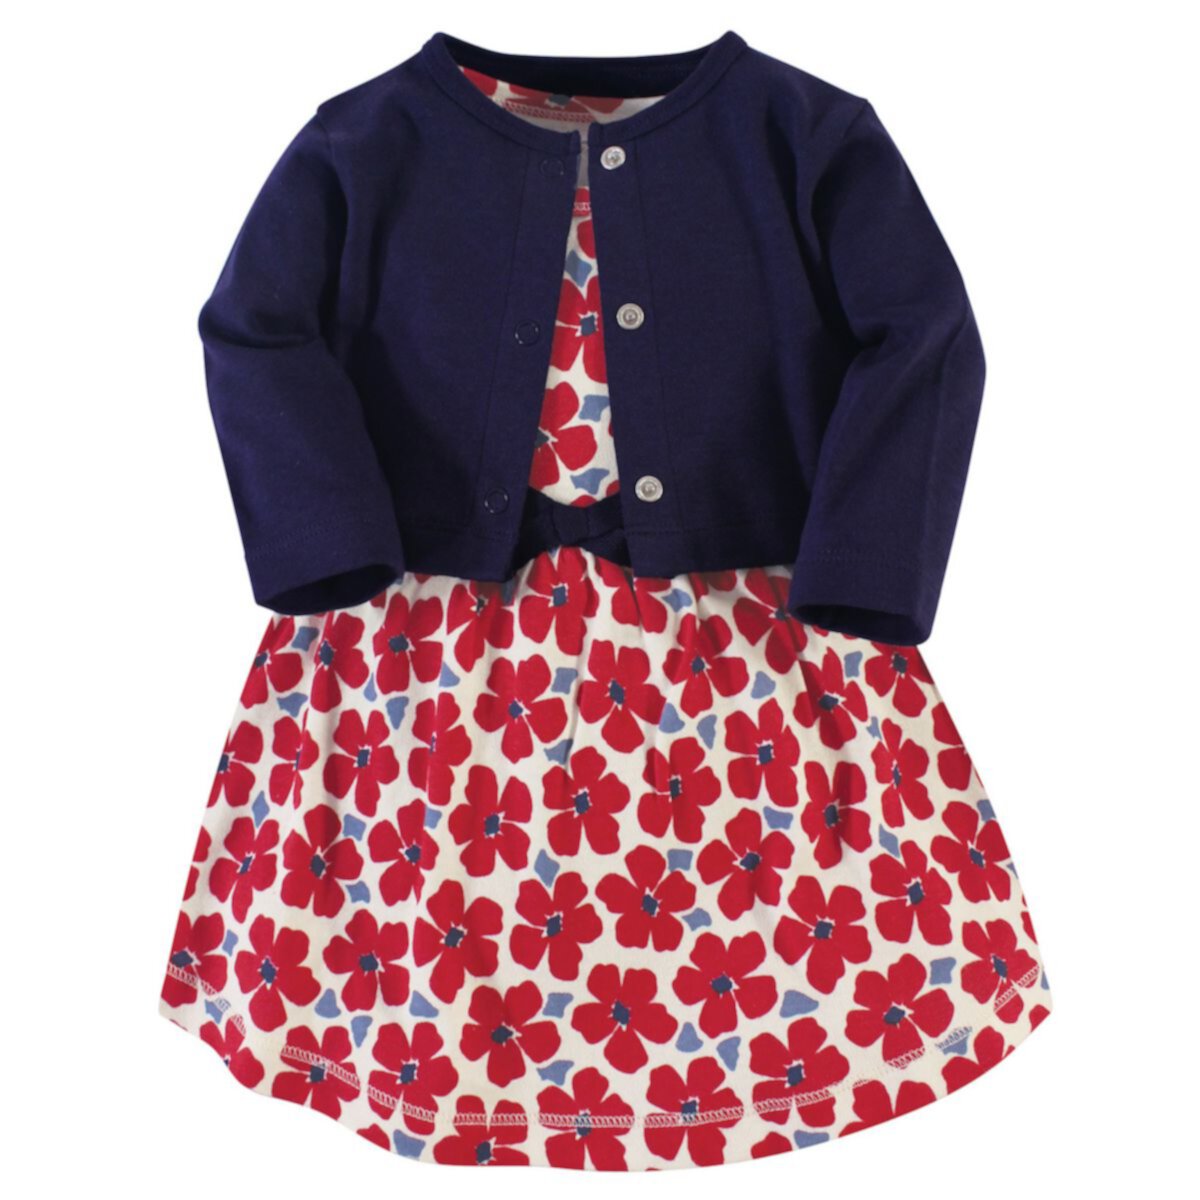 Touched by Nature Baby and Toddler Girl Organic Cotton Dress and Cardigan 2pc Set, Red Flowers Touched by Nature